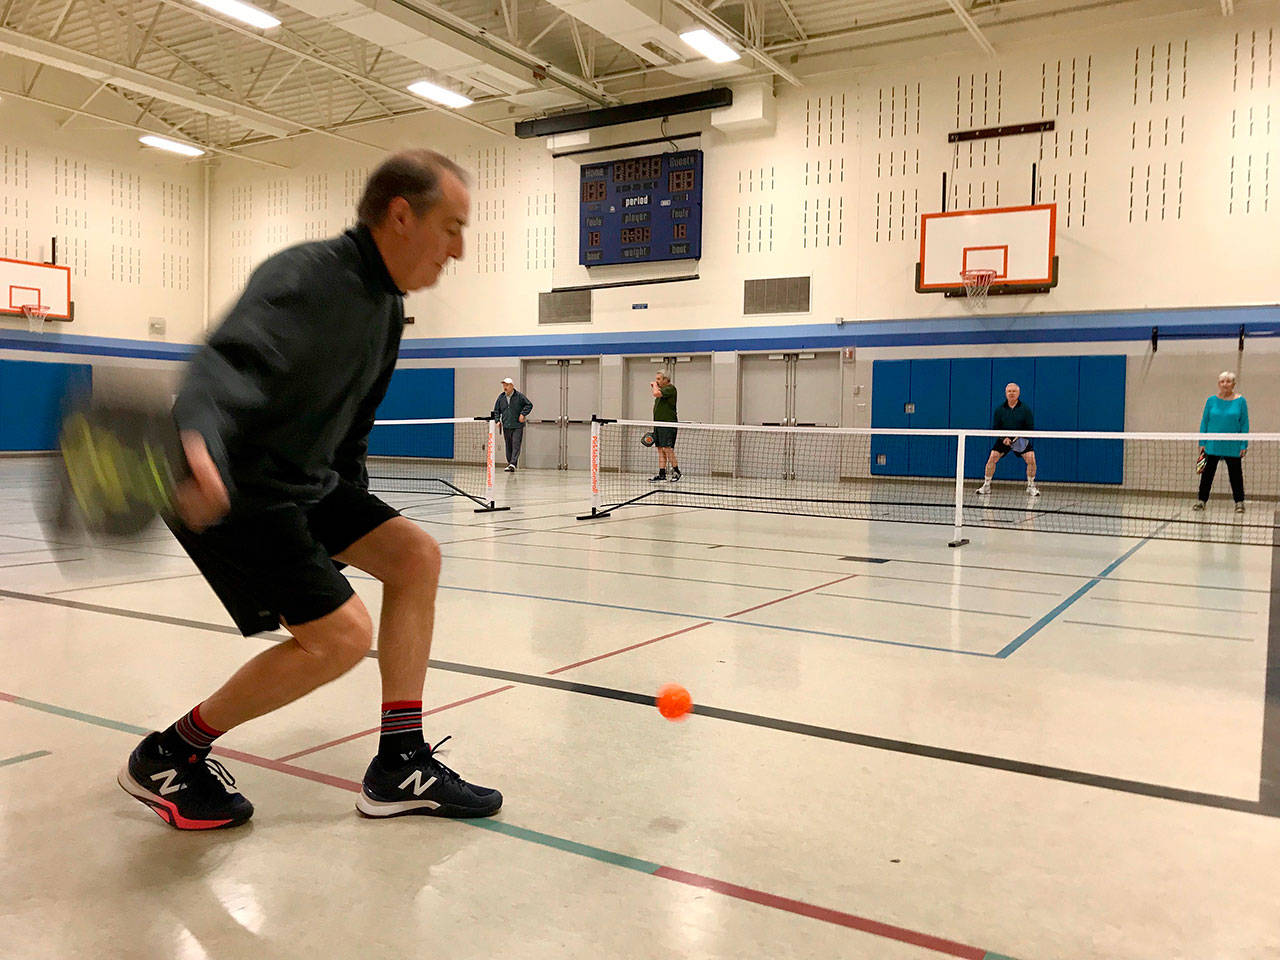 Twice a week, people signed up with South Whidbey Parks and Recreation program can play on pickleball courts in the gym of the South Whidbey Community Center. (Photo provided)